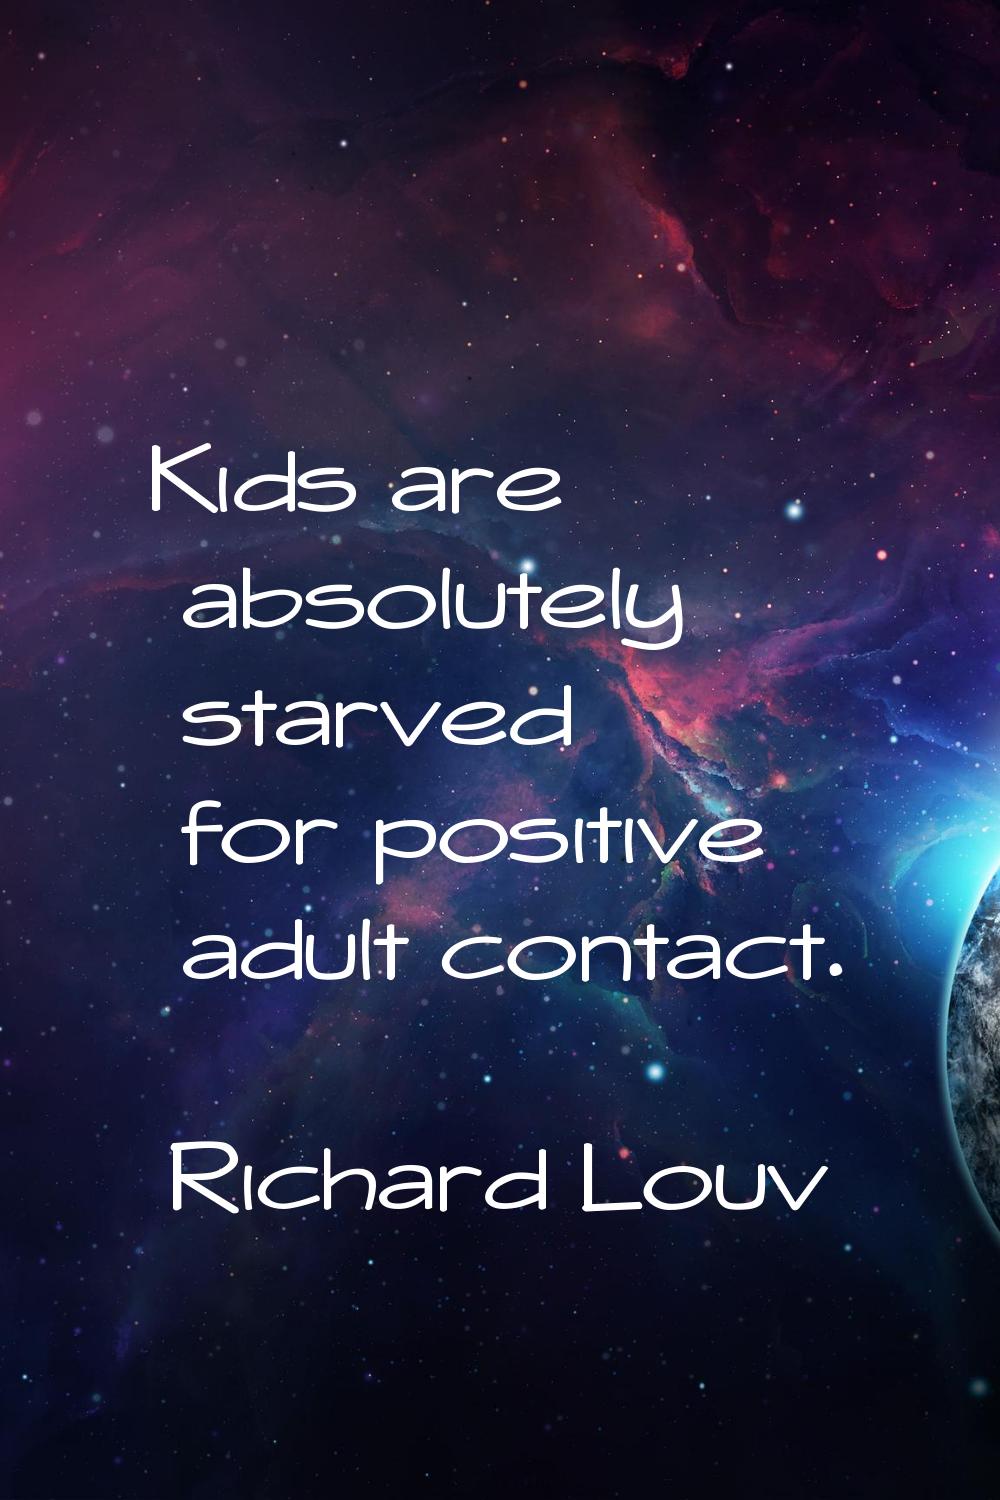 Kids are absolutely starved for positive adult contact.